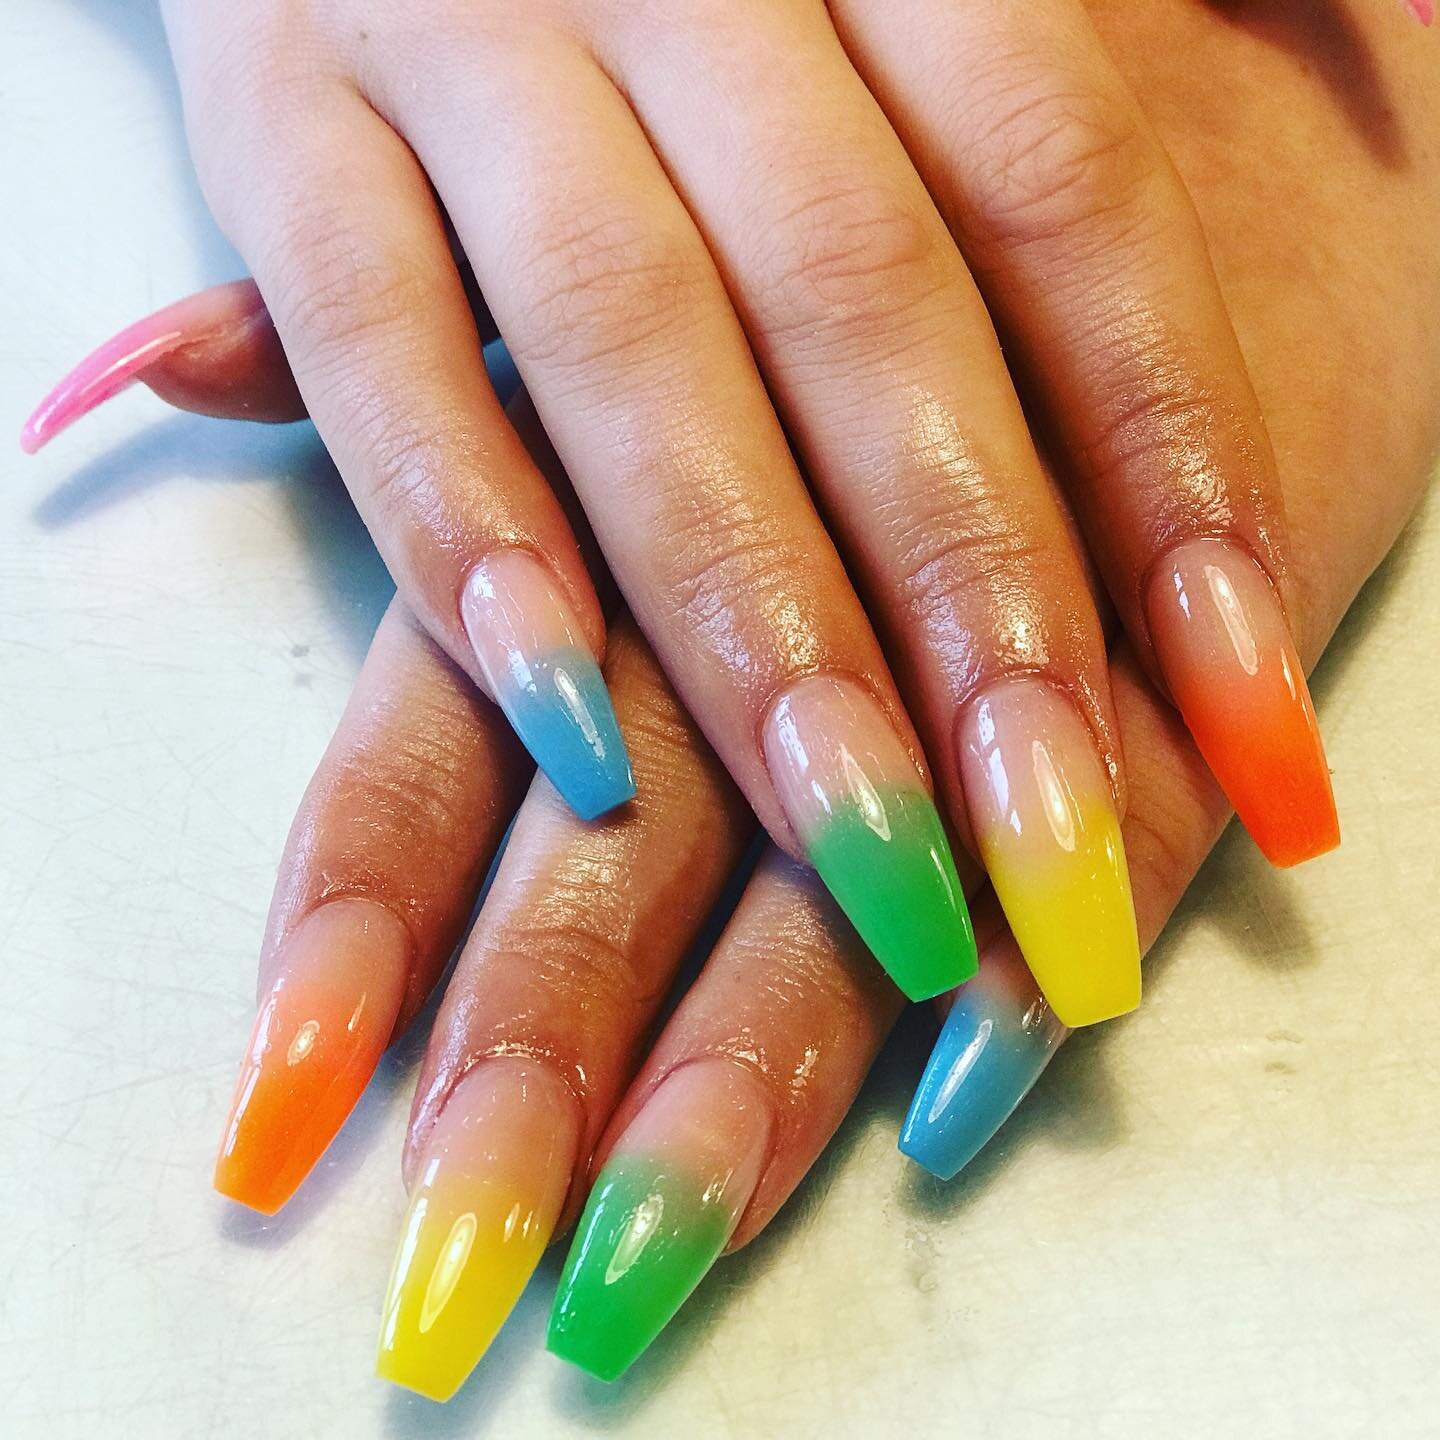 When you can&rsquo;t decide on one colour 😍😍
.
.
.
#ombre #ombrenails #colournails #fun #nails #nailart  #nailsofinstagram #manicure #u #nail #beauty #gelnails #nailstagram #nailsonfleek #nailsoftheday #instanails #nailstyle #inspire #naildesign #n